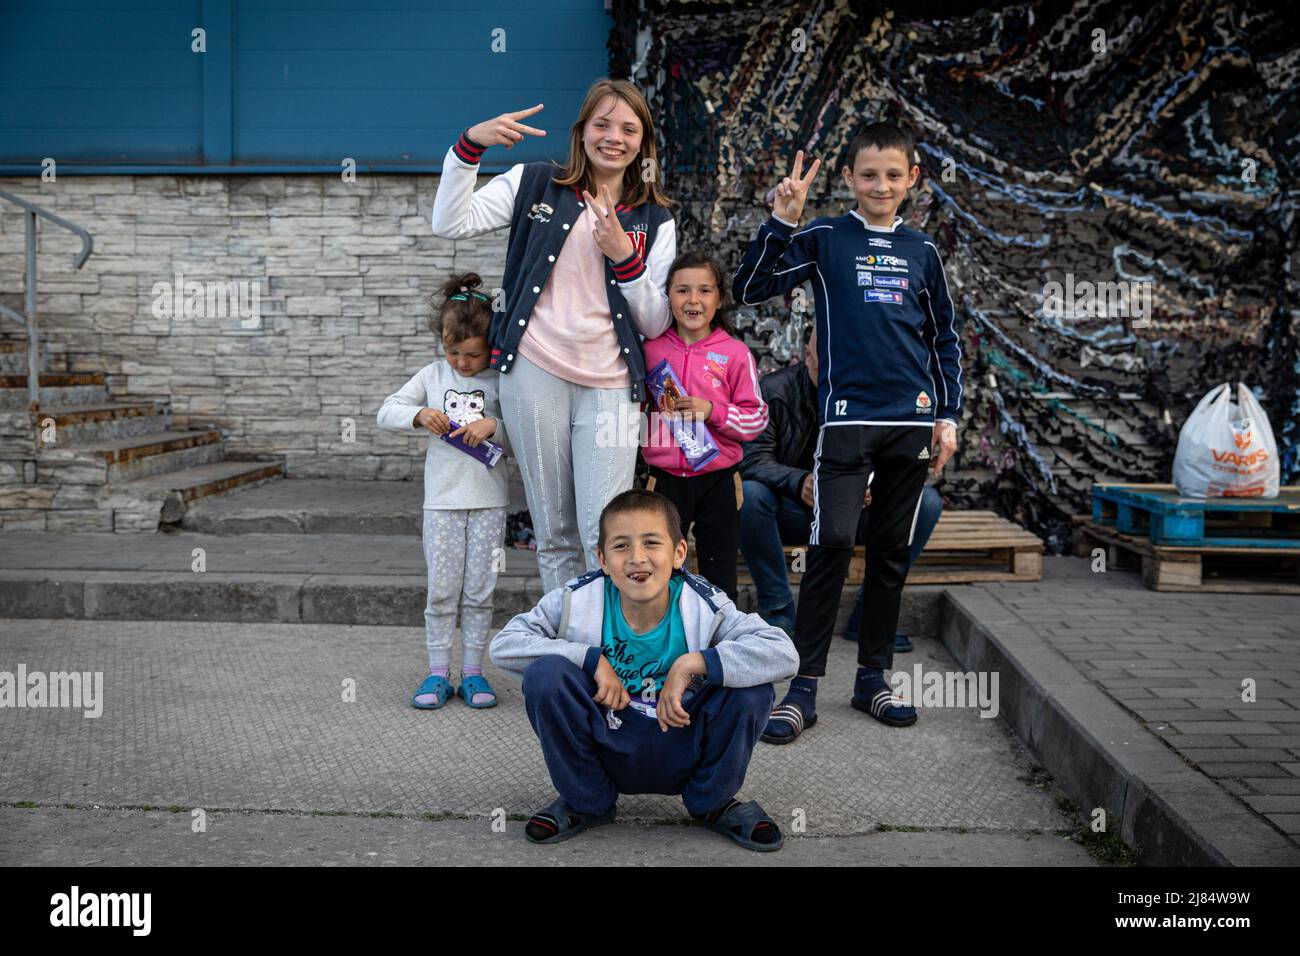 Sophia (L), Valeria and their siblings who fled from Kherson pose for a photo outside an underground shelter. Temporary refugee shelters have been set up in Zaporizhia, as the city has been constantly receiving refugees fleeing from Russian controlled territories in the country's east and south.According to the United Nations, more than 11 million people are believed to have fled their homes in Ukraine since the conflict began, with 7.7 million people displaced inside their homeland. (Photo by Alex Chan Tsz Yuk/SOPA Images/Sipa USA) Stock Photo